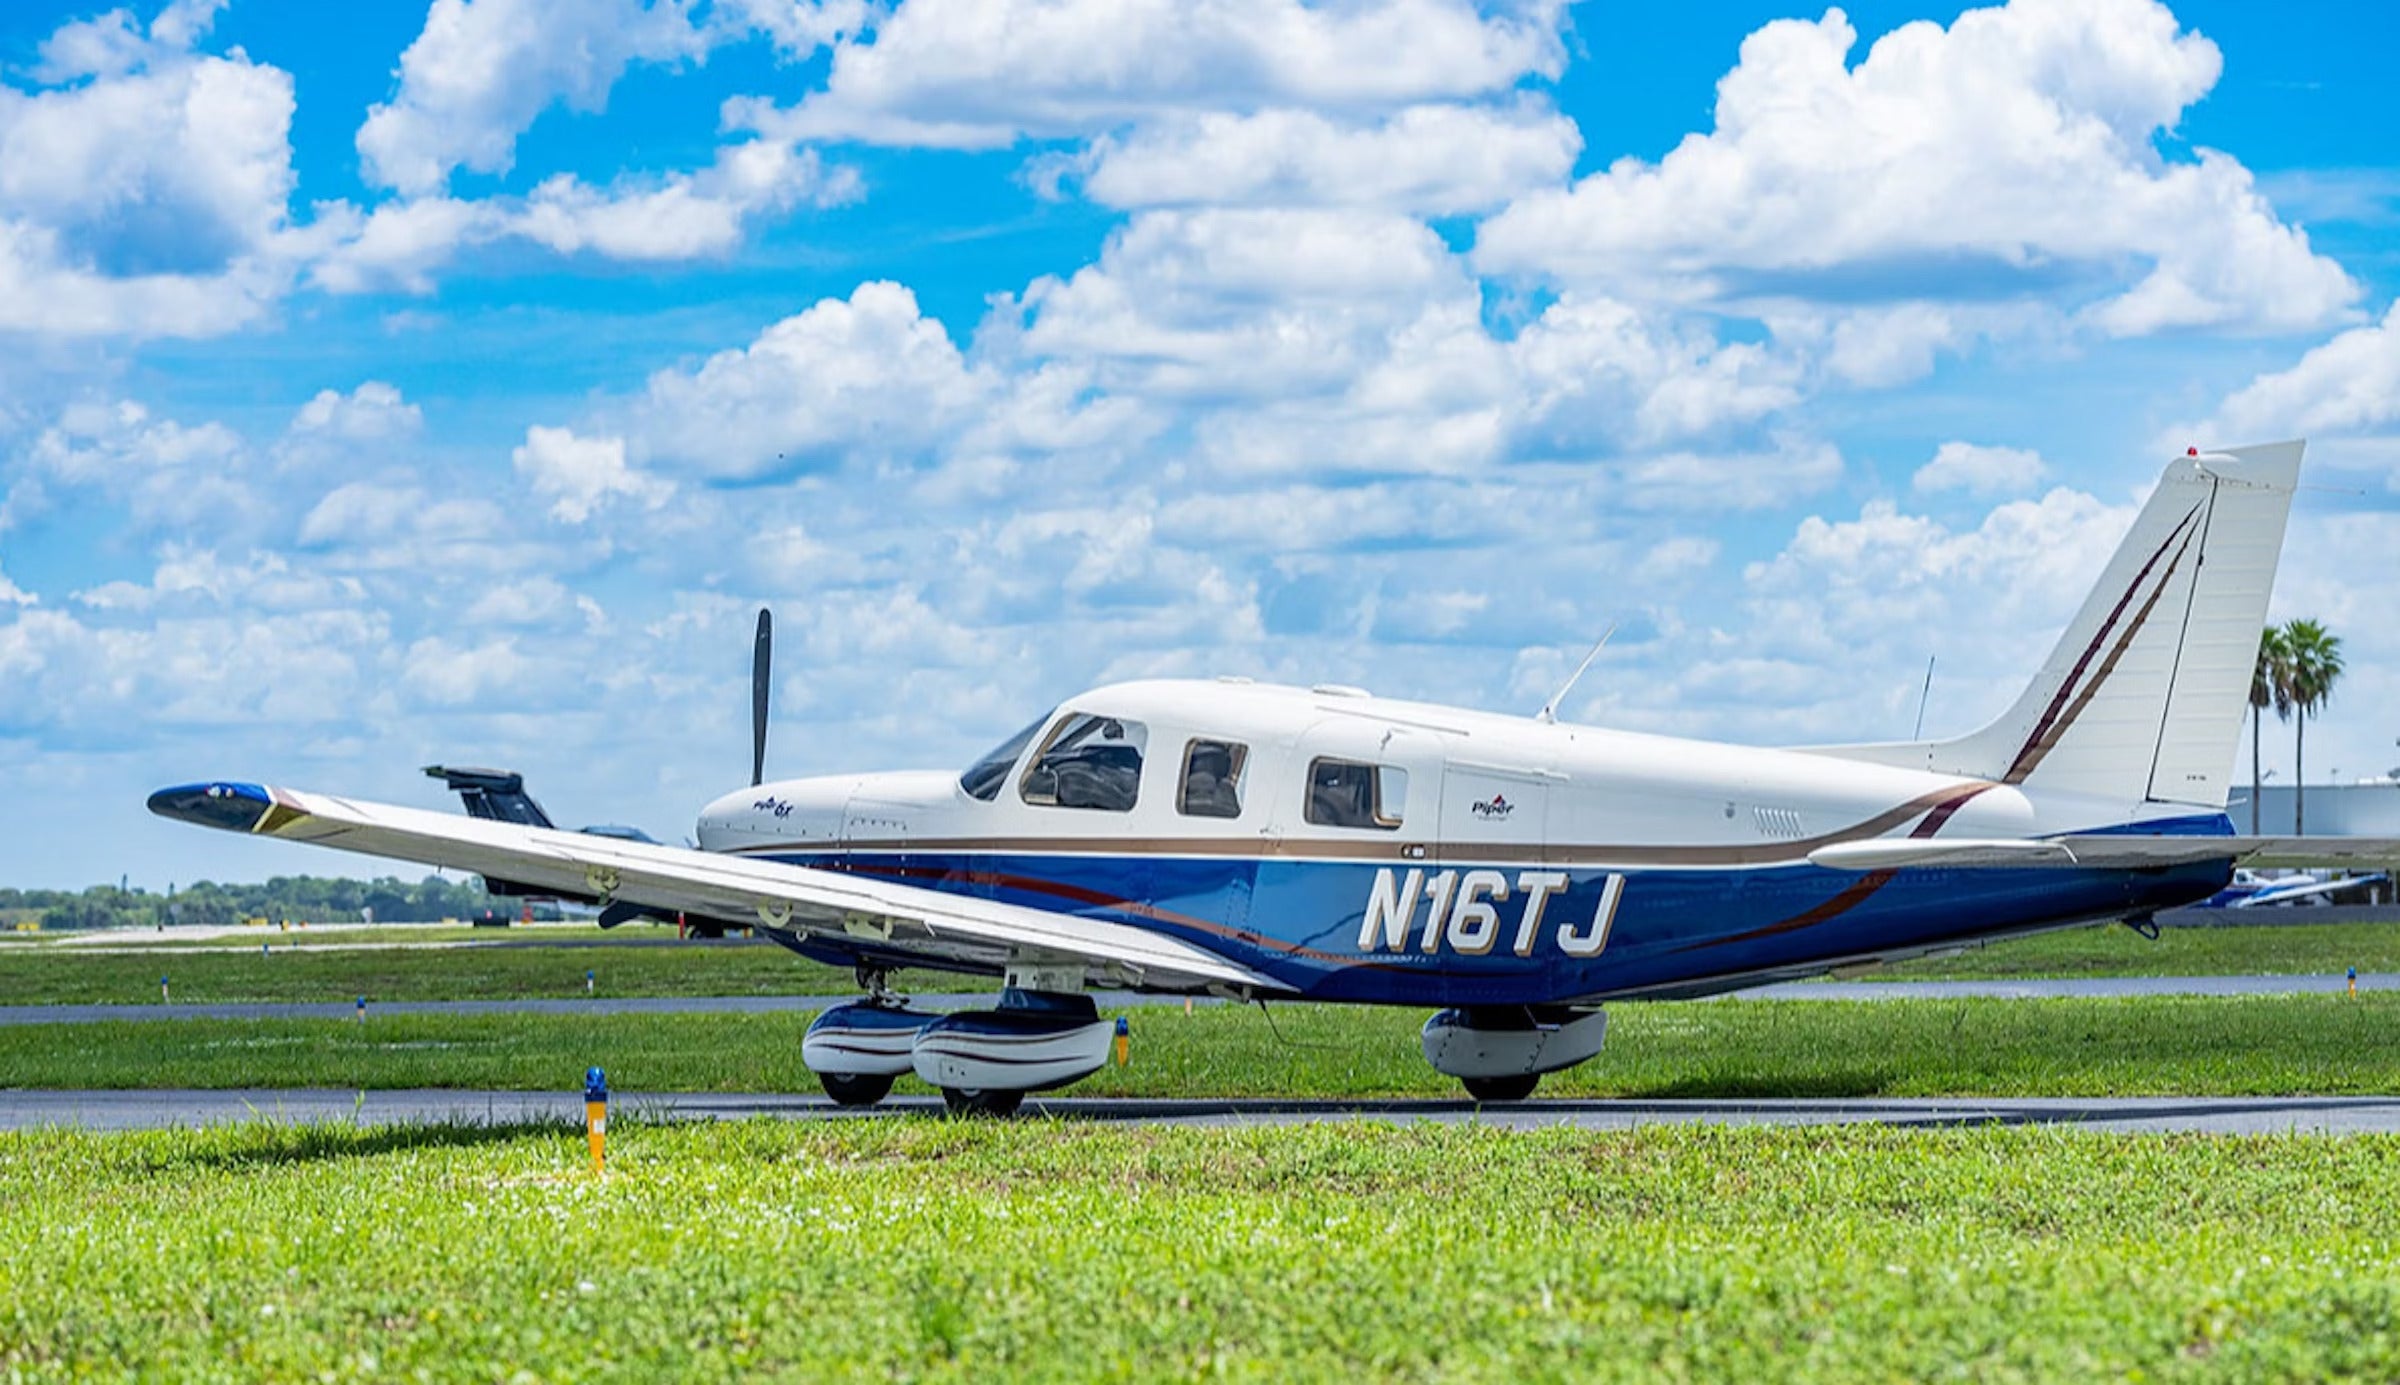 This 2004 Piper PA-32-301FT 6X, An Airborne SUV, Is an ‘AircraftForSale’ Top Pick